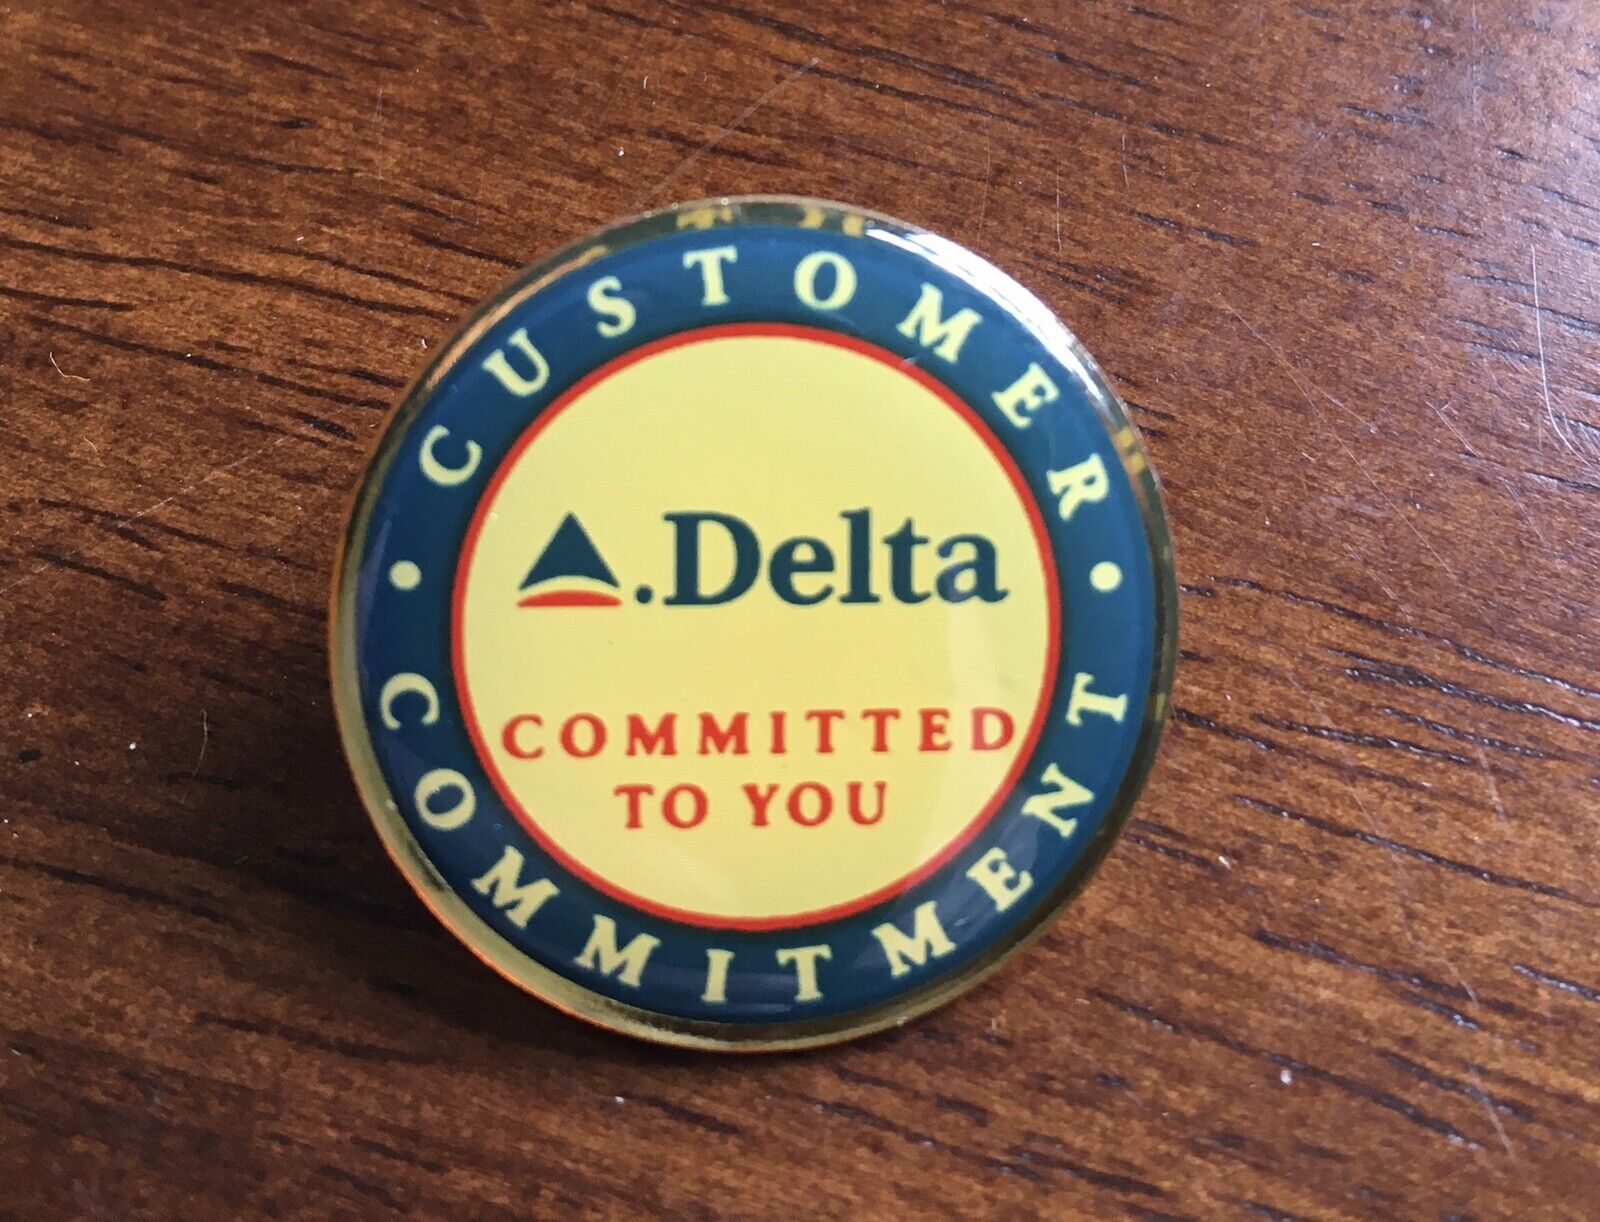 Vintage Delta Air Lines “Committed To You” Former Soft Widget Pin